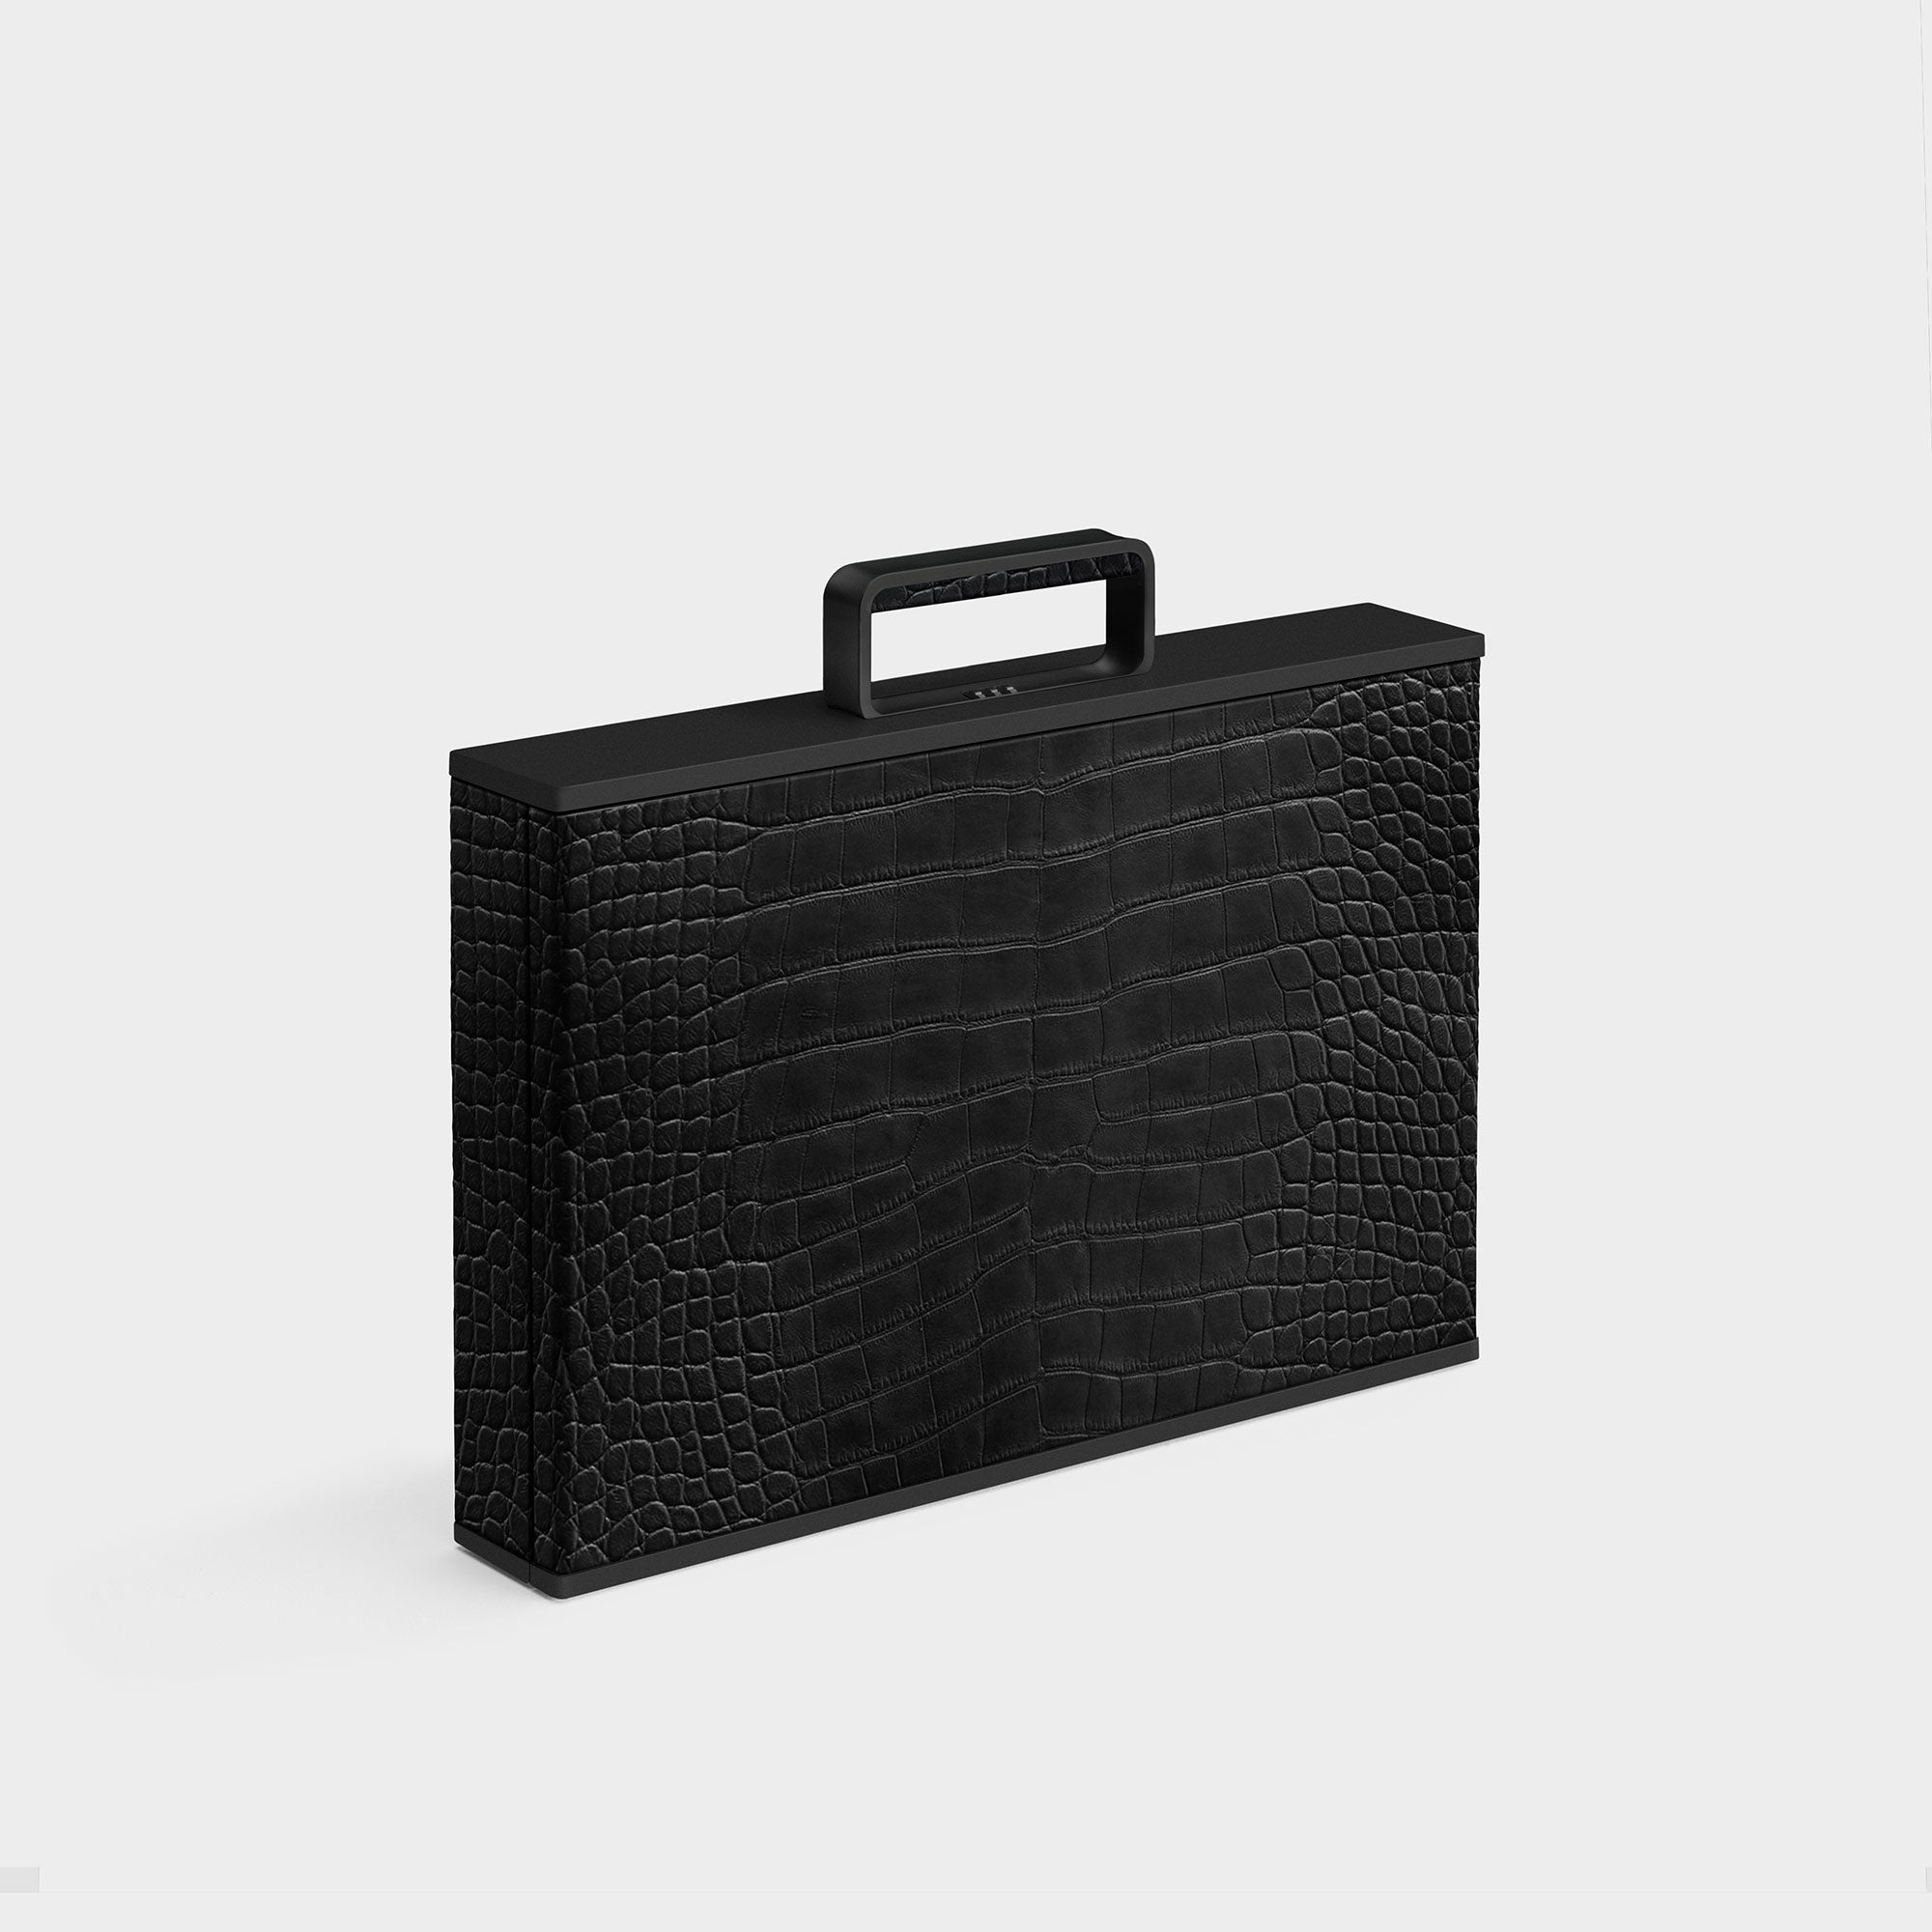 Designer crocodile leather all black briefcase for business men. Handmade in Canada by Charles Simon.